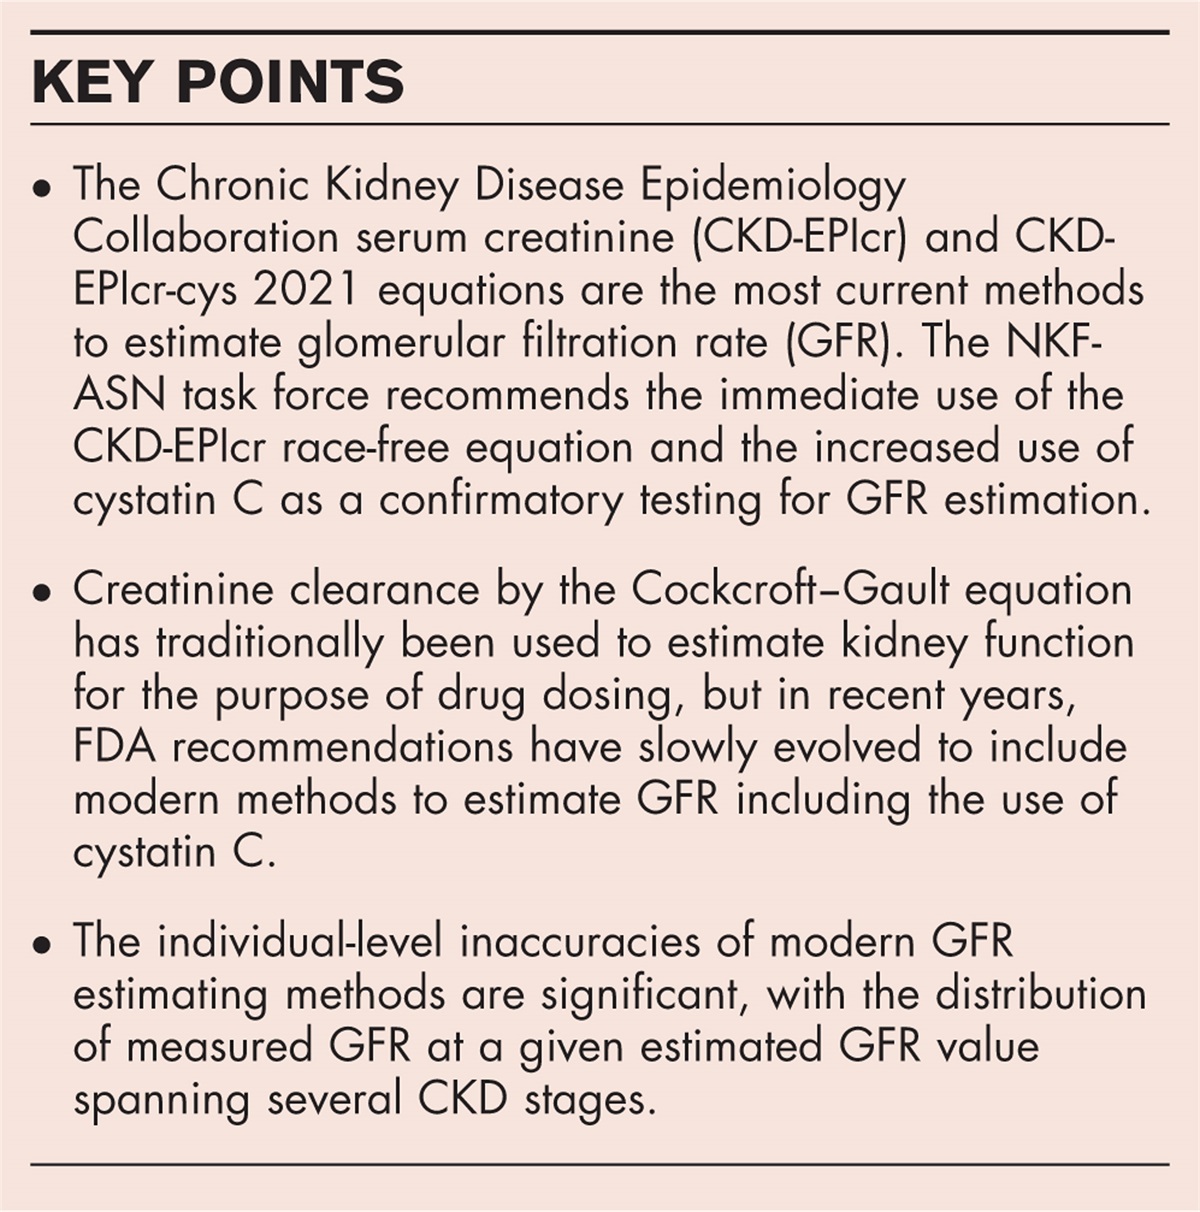 Traditions and innovations in assessment of glomerular filtration rate using creatinine to cystatin C